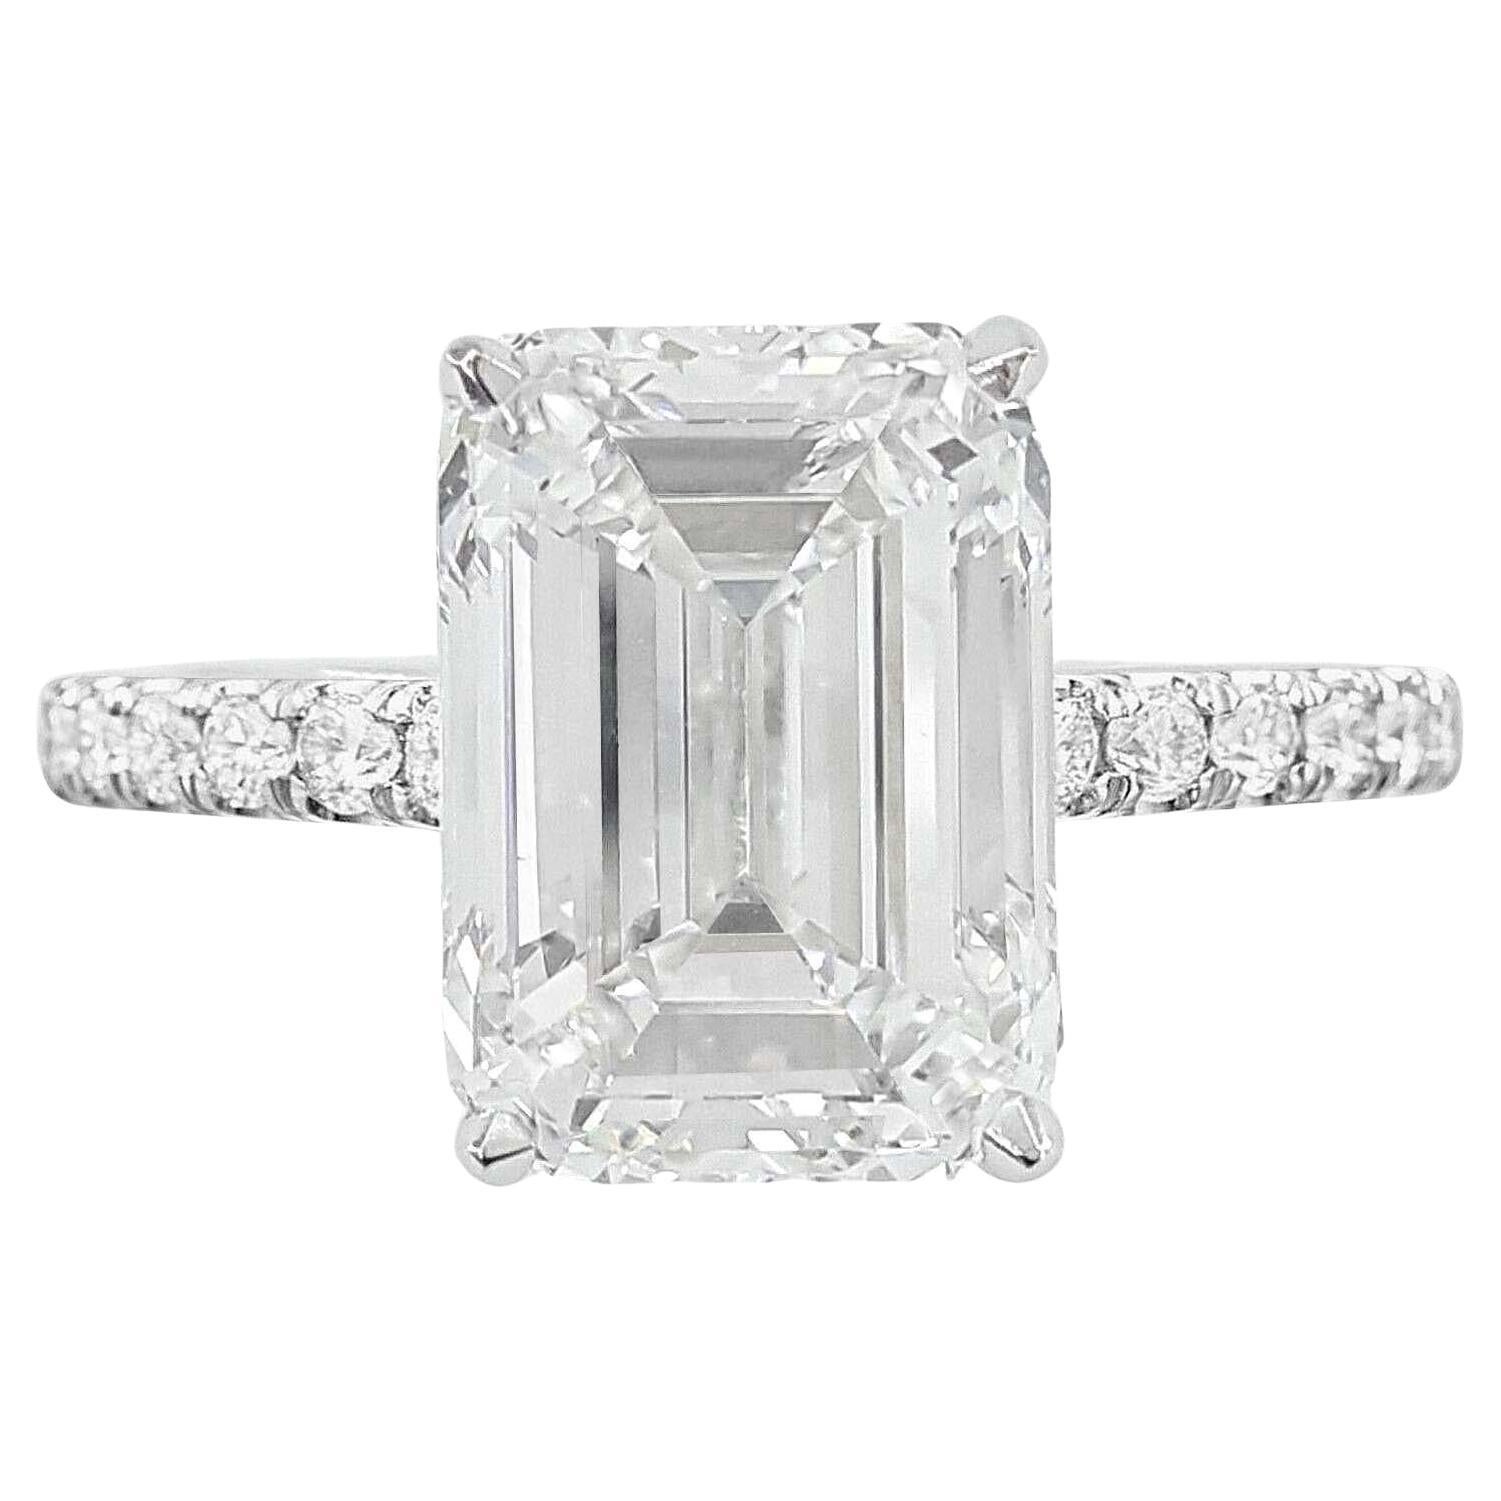 Tiffany & Co. Platinum 4.18 ct Total Weight Emerald Brilliant Cut Diamond Engagement Ring. 

The ring weighs 5.2 grams, size 6 the center stone is a Natural Emerald Cut diamond weighing 4.02ct, F in Color, VVS1 in Clarity, Excellent Cut, Very Good